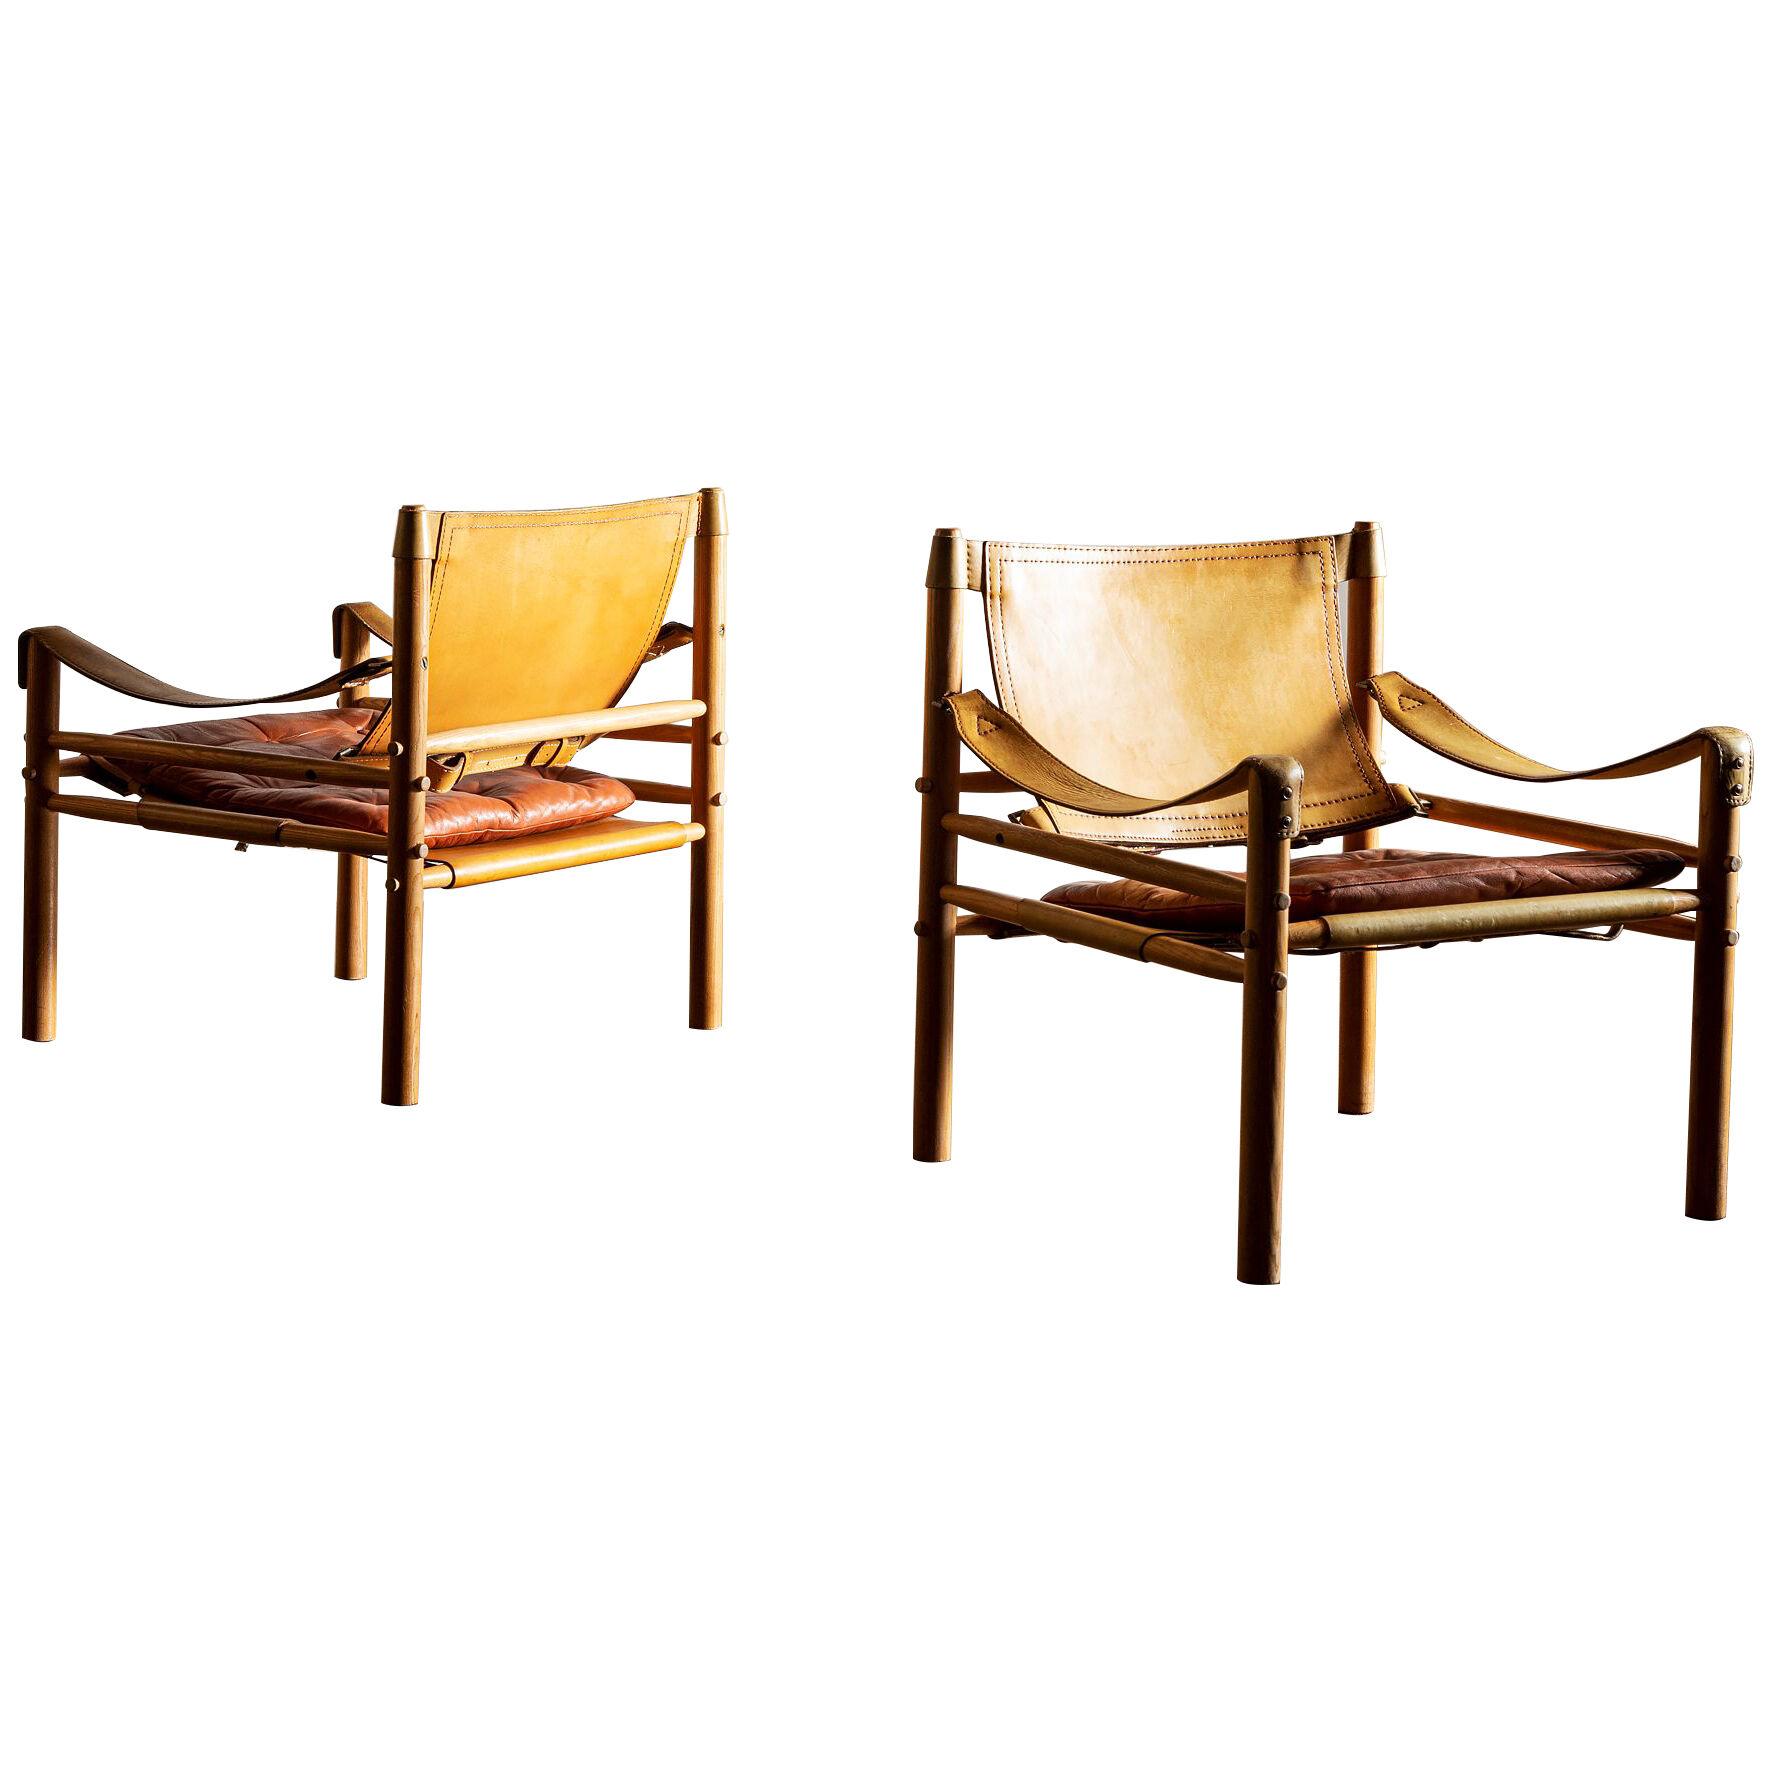 Pair of Arne Norell Sirocco Safari Chairs, Sweden, 1960s